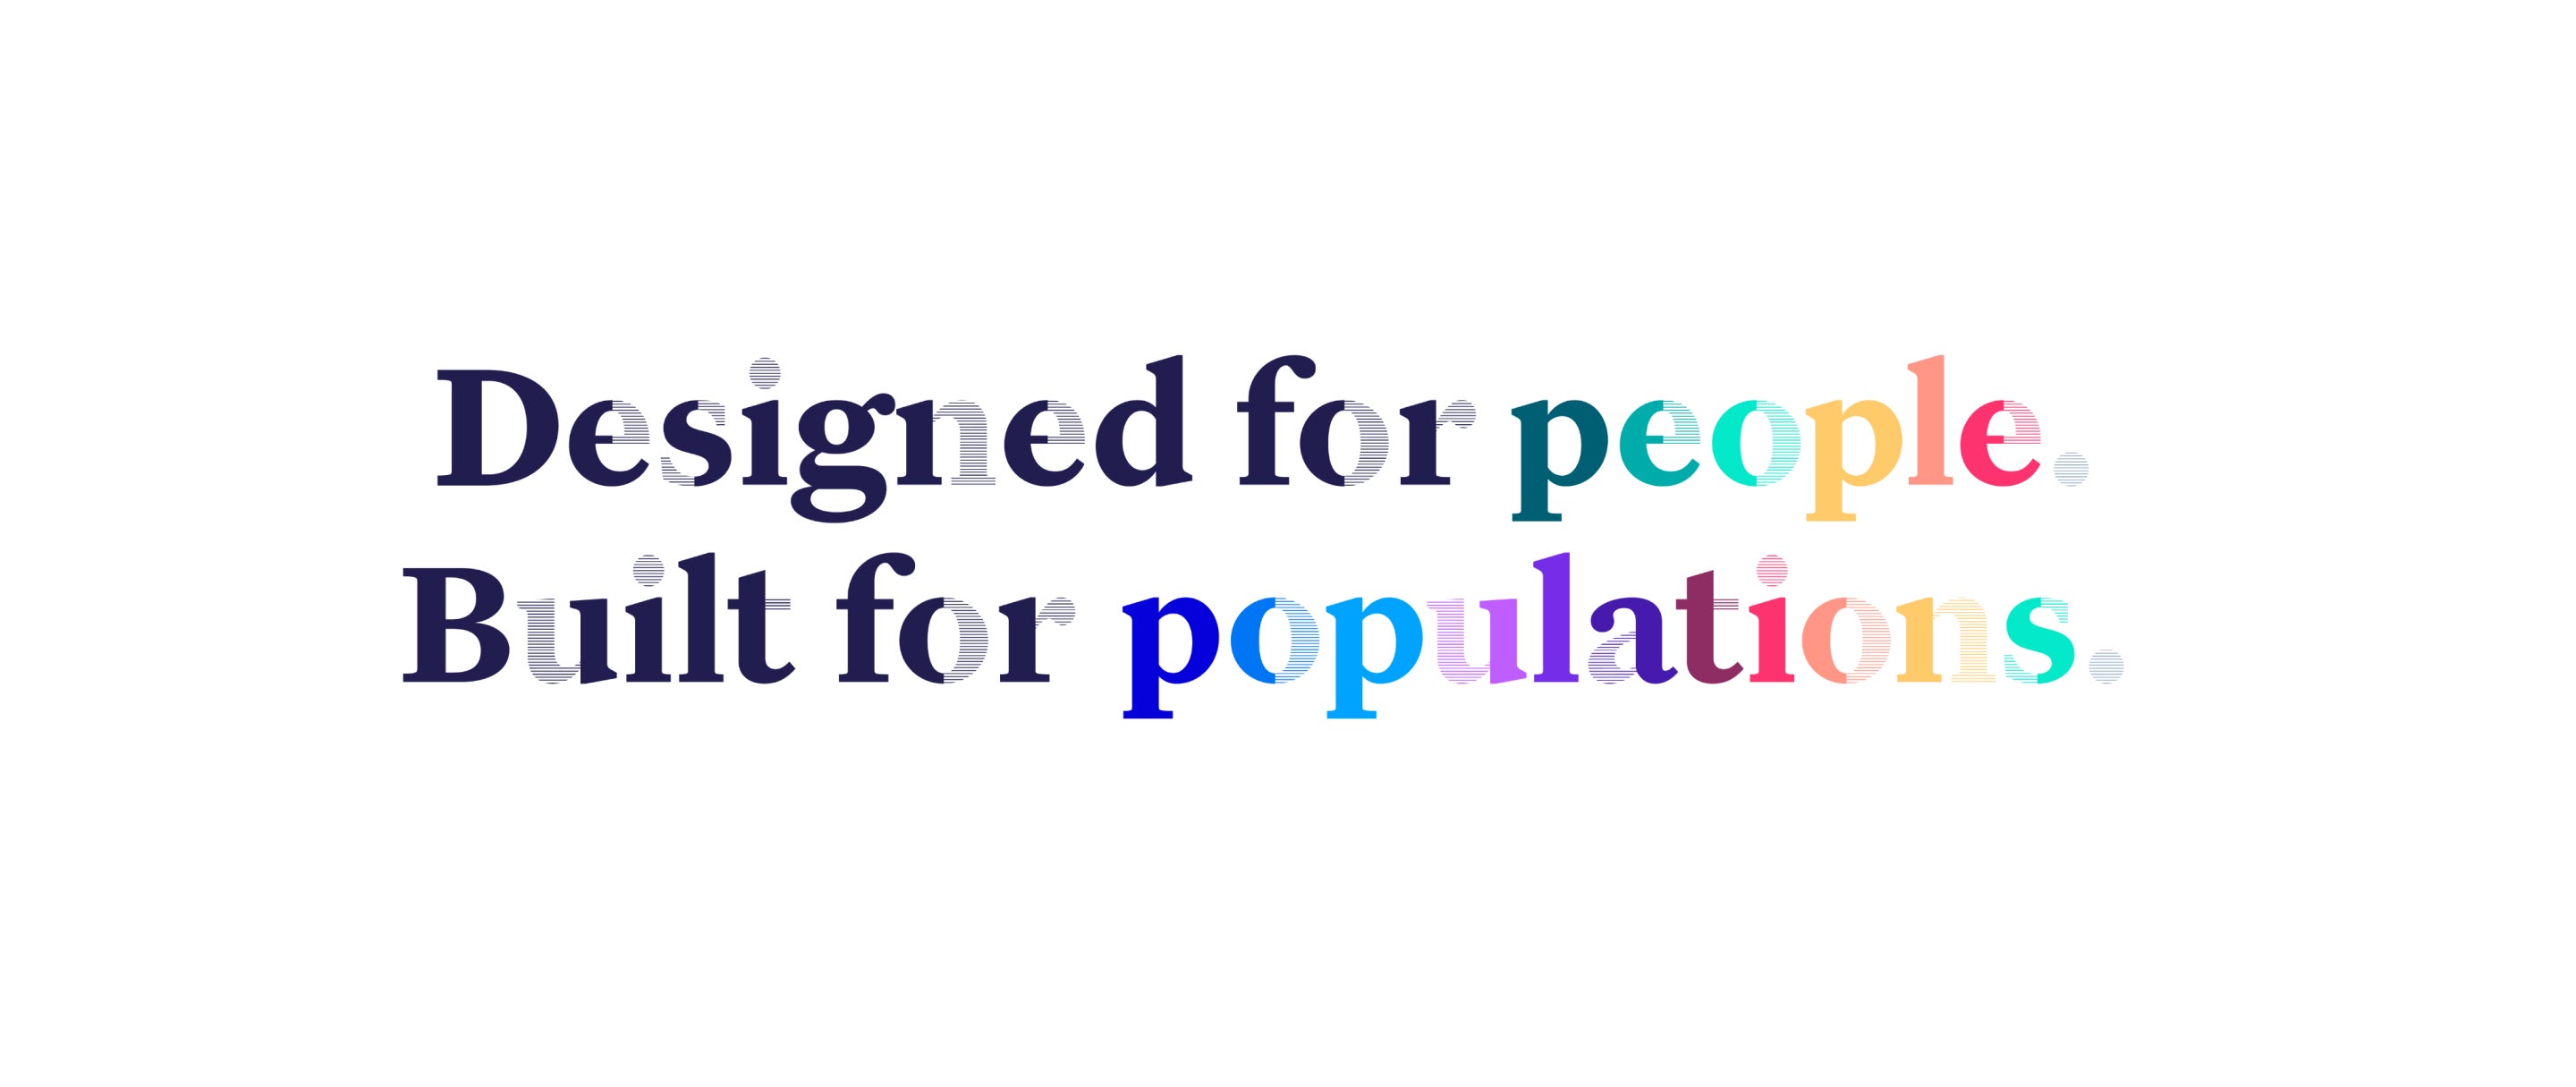 Colorful text that says "Designed for people. Built for populations."